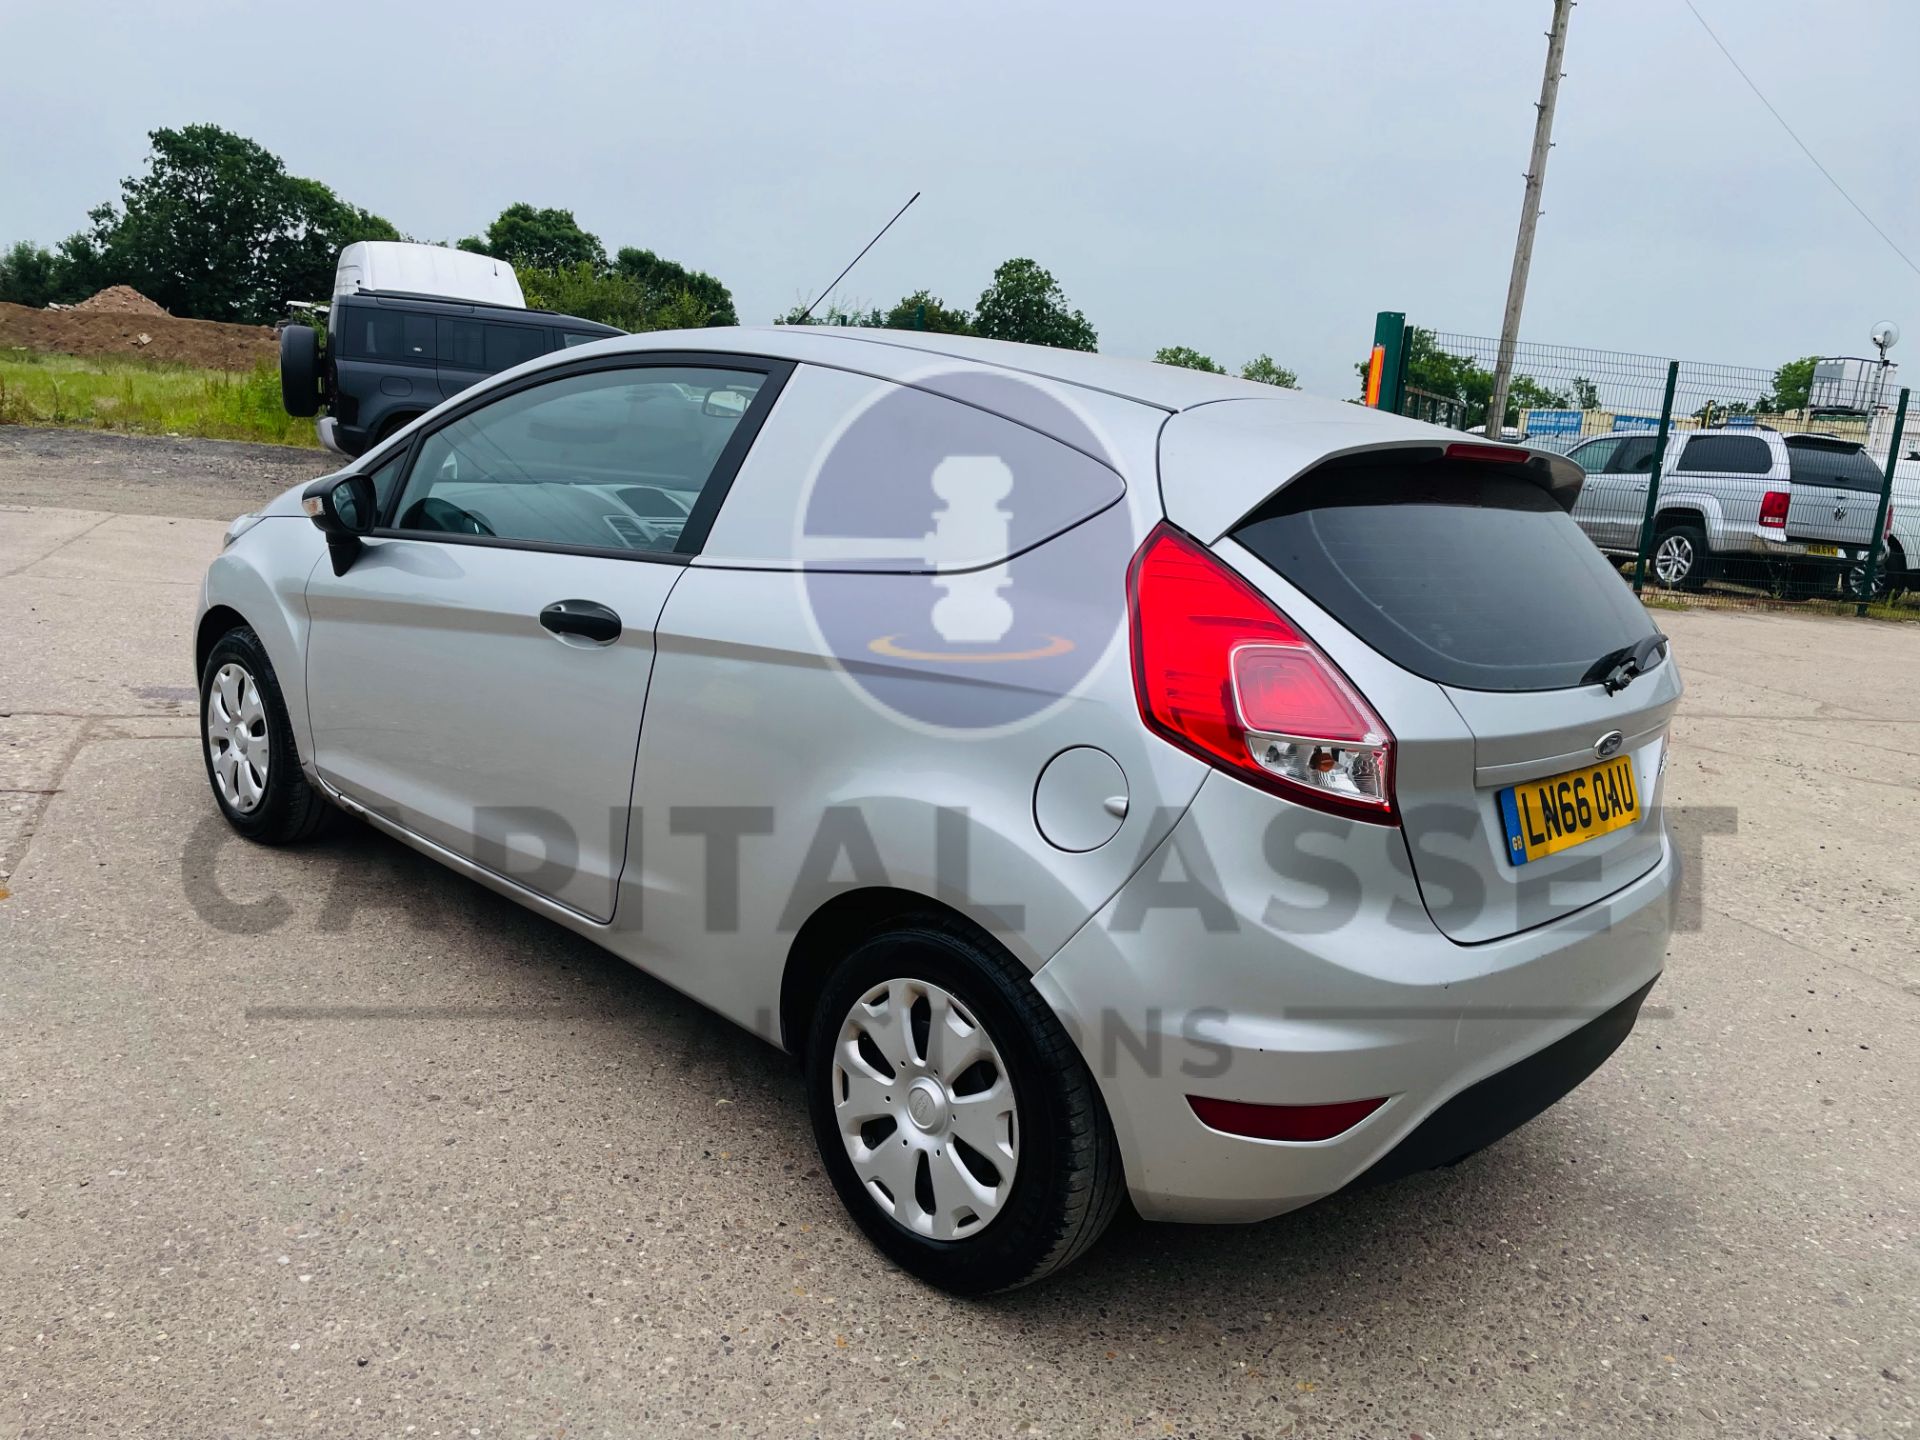 FORD FIESTA *LCV - PANEL VAN* (2017 - EURO 6) 1.5 TDCI - AUTO STOP/START (1 OWNER) *AIR CON* - Image 11 of 38